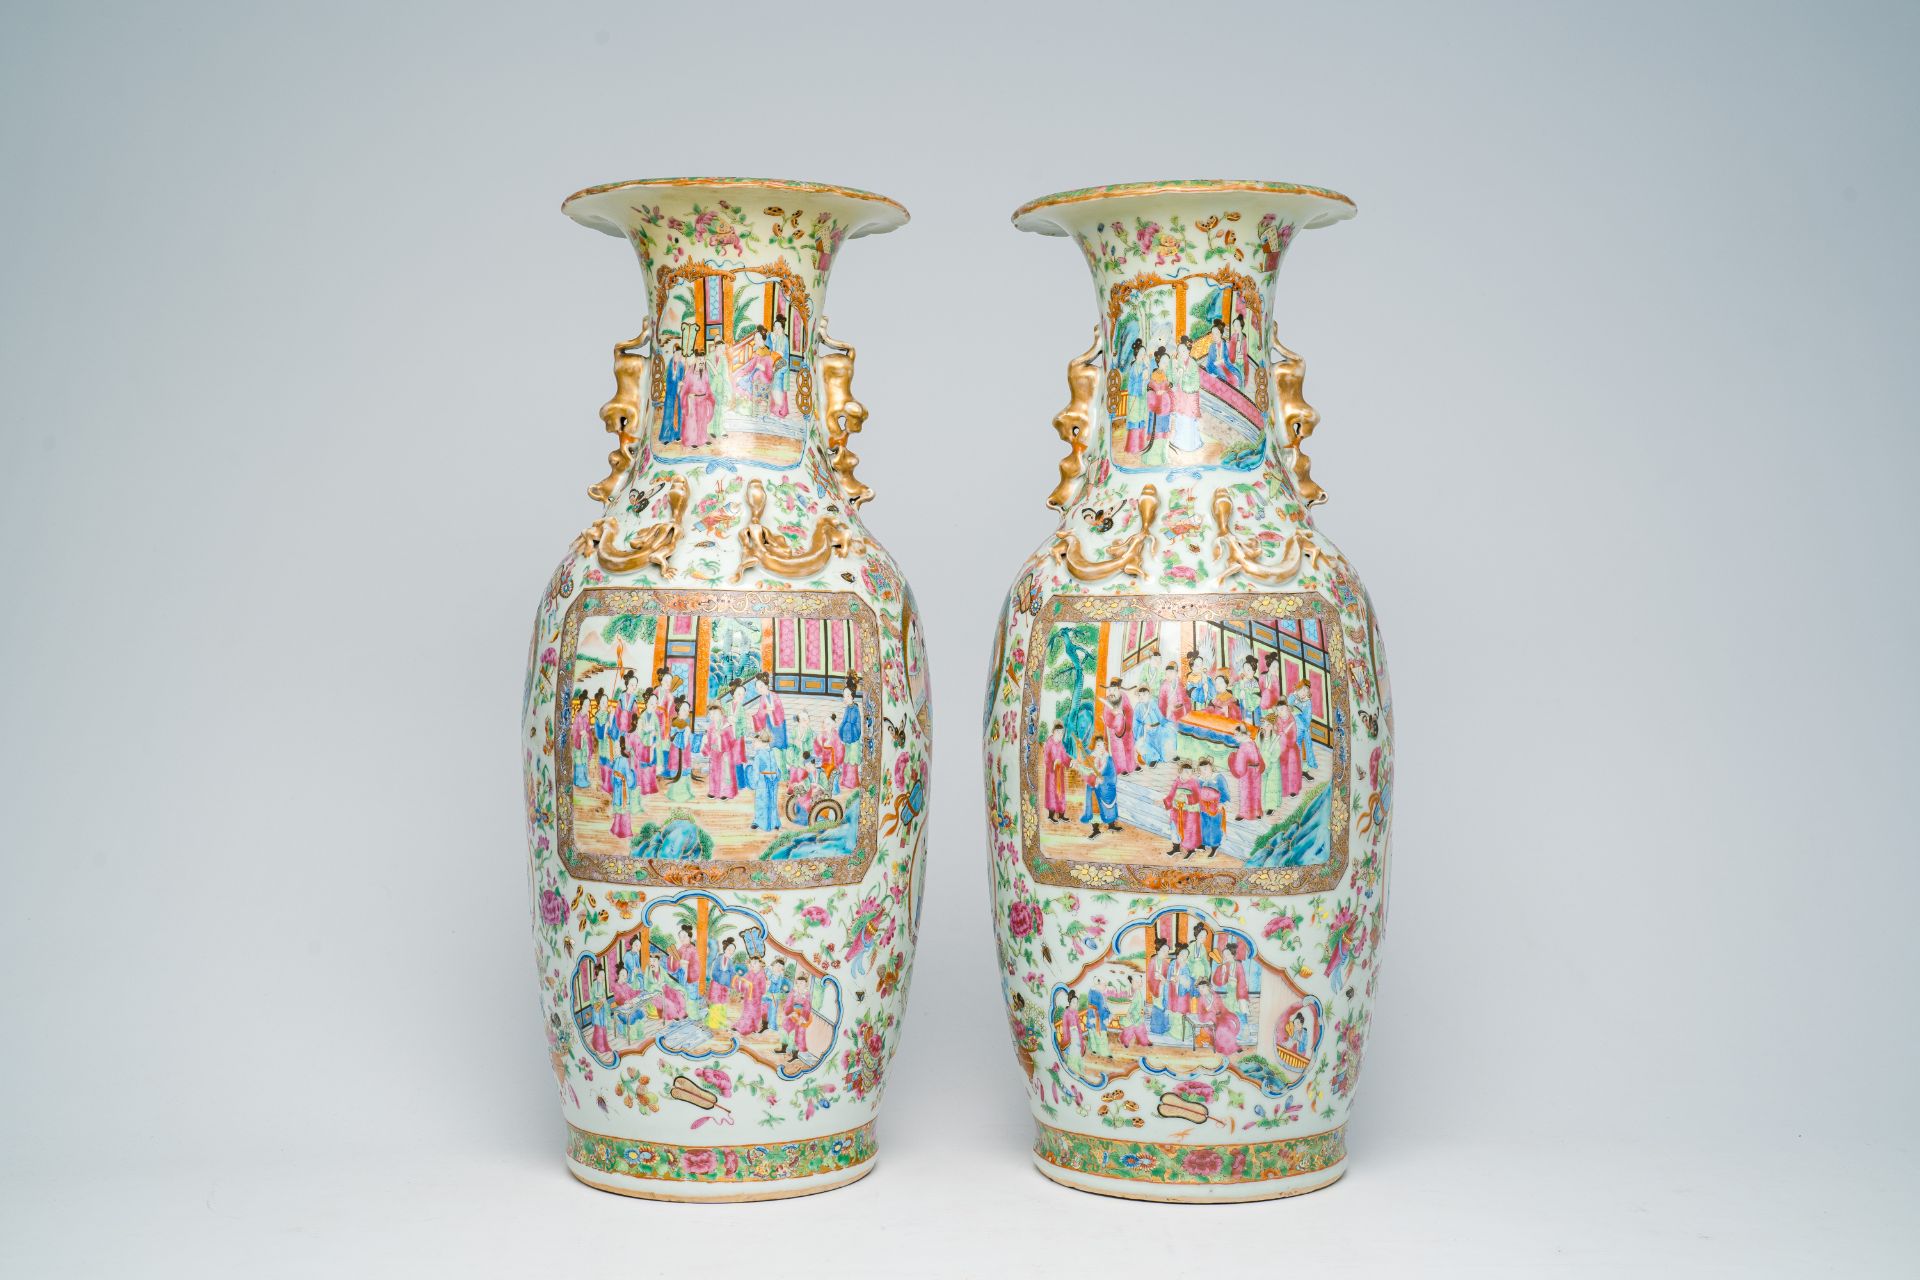 A pair of Chinese Canton famille rose vases with palace scenes and floral design, 19th C. - Image 3 of 7